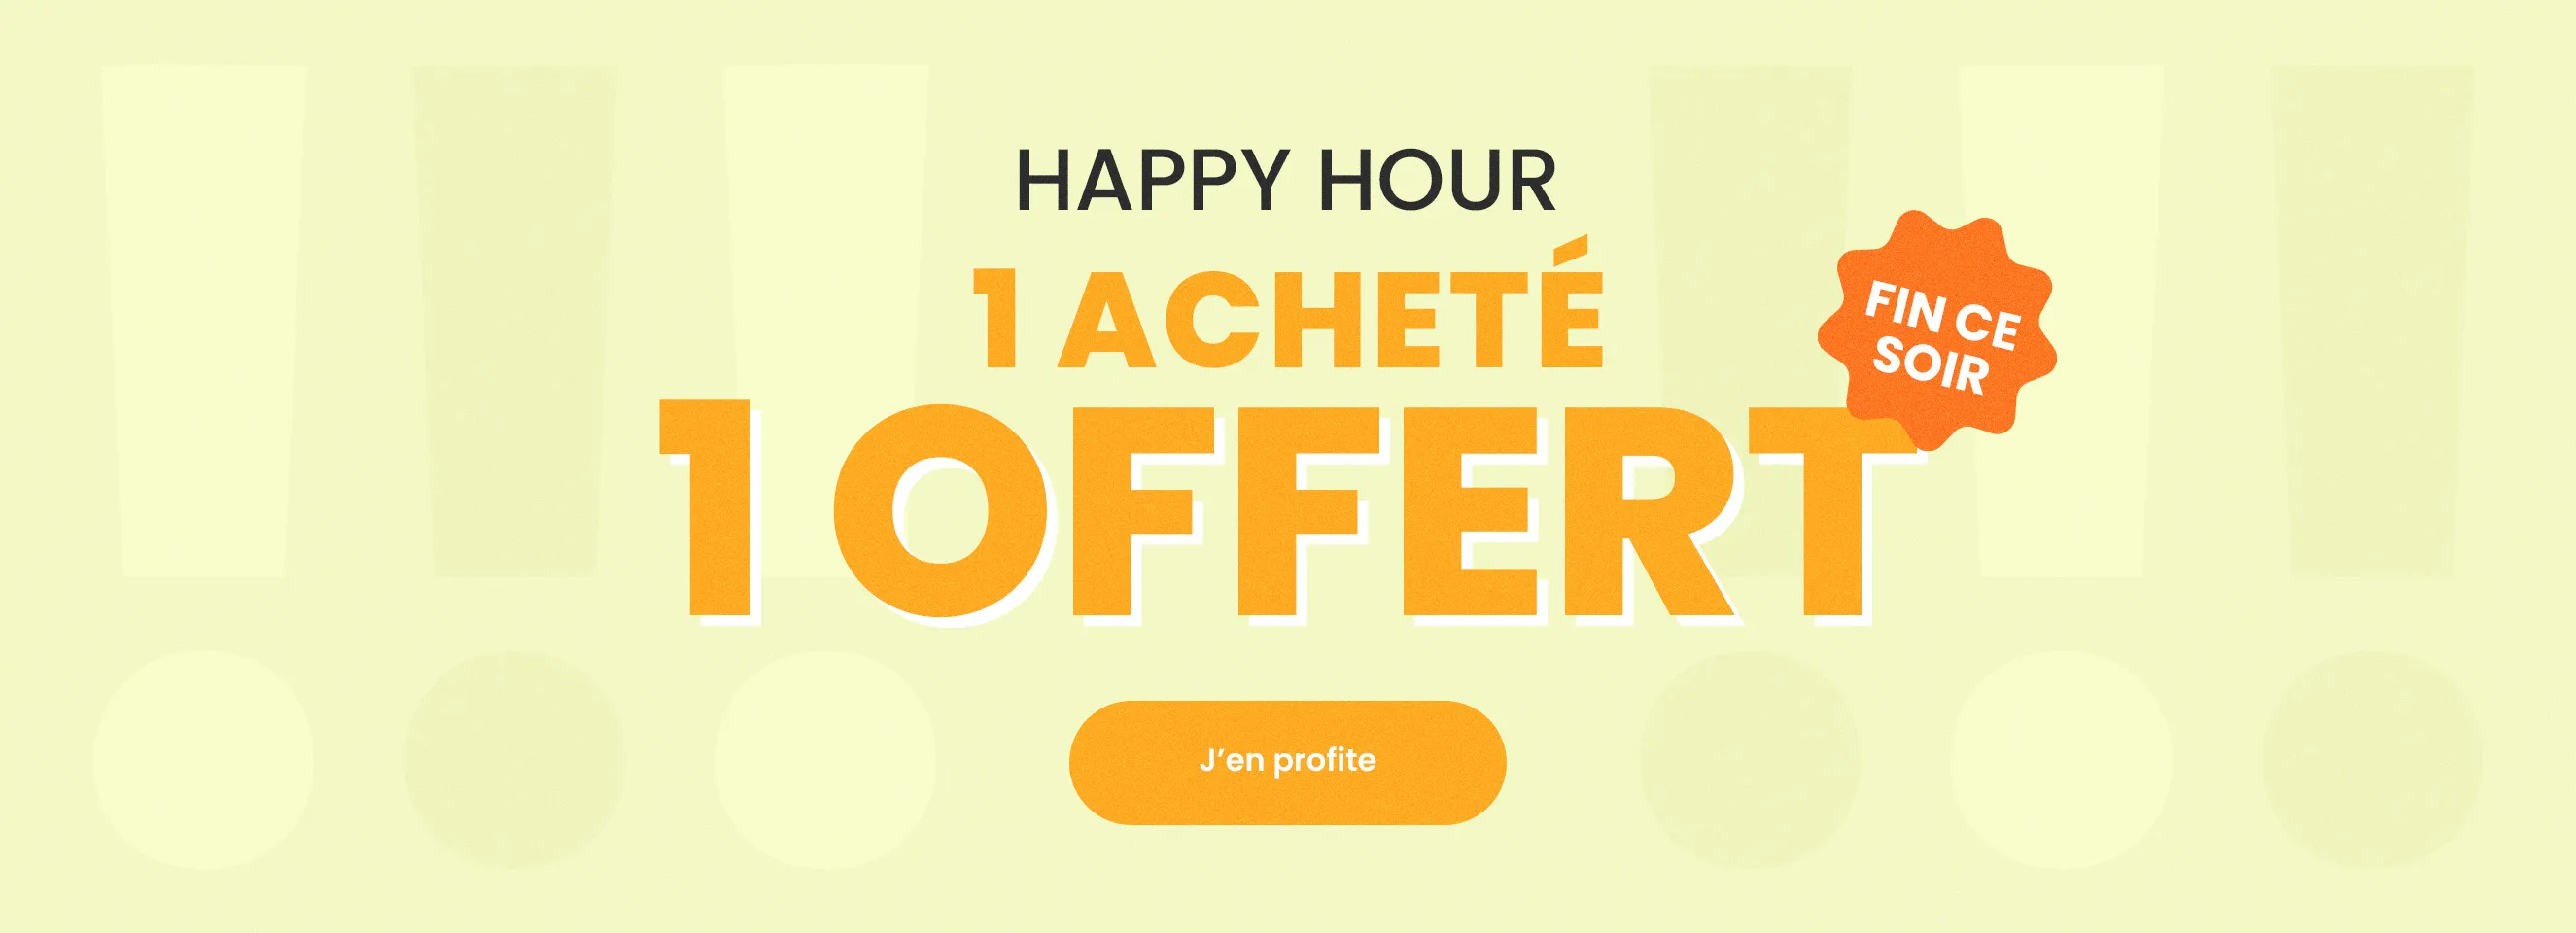 Click it to join Happy Hour activity